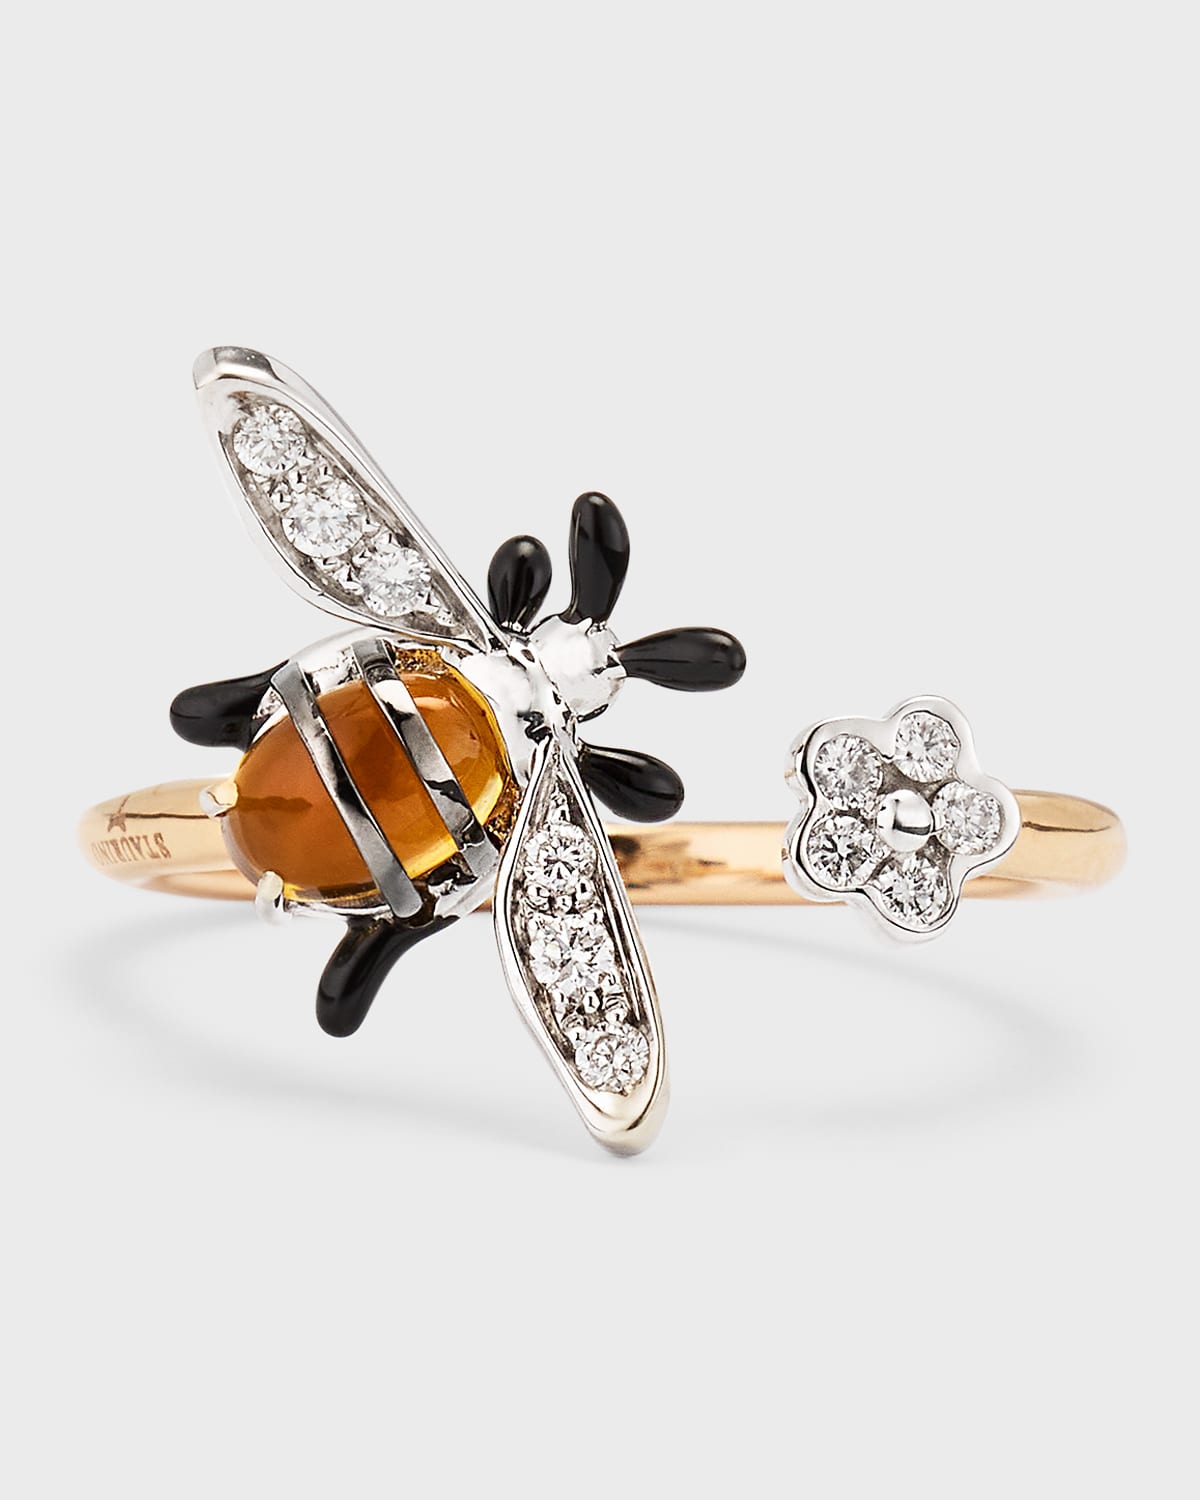 Rose Gold Diamond and Citrine Ring, Size 6.75